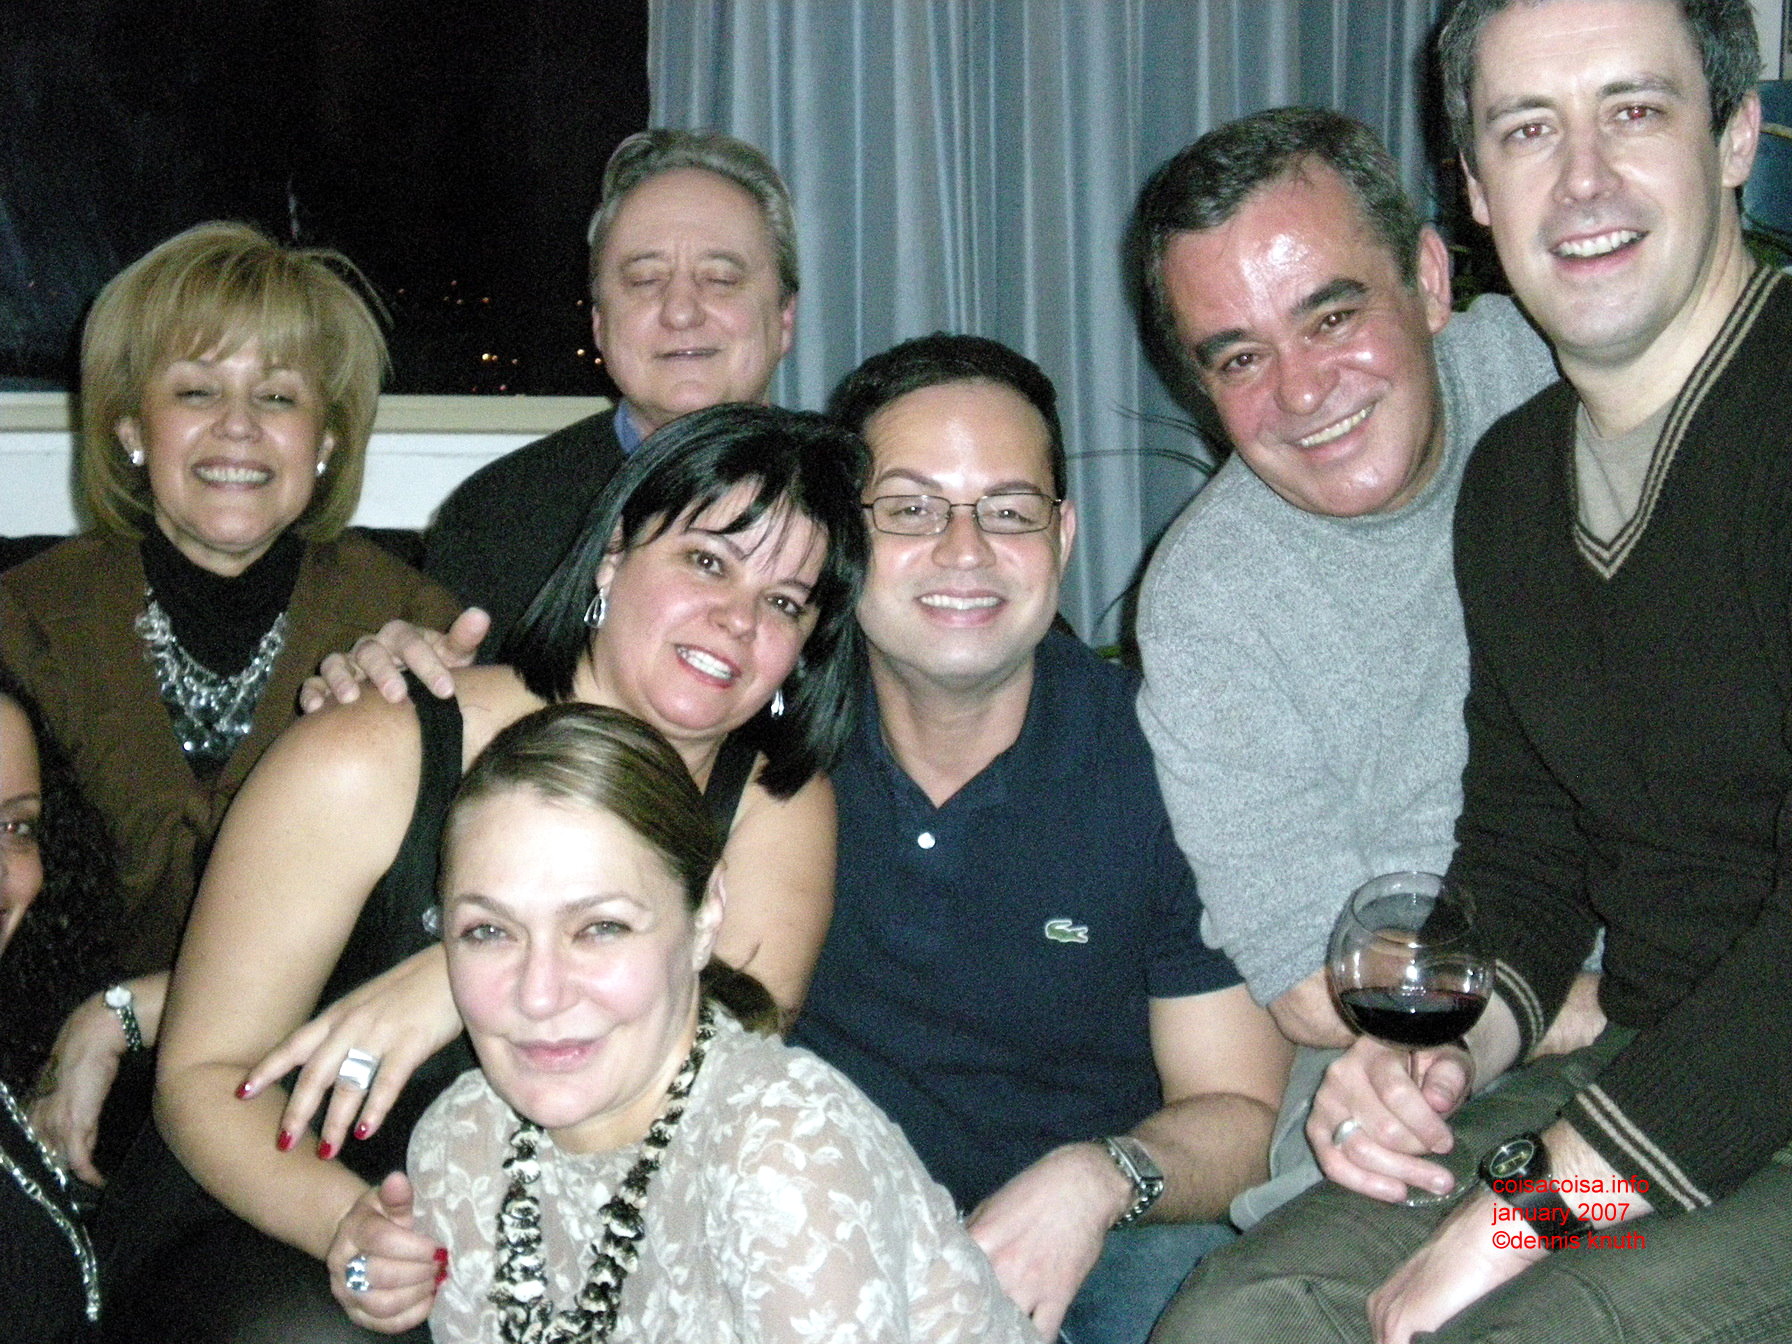 Some of the Guests at Olga Kakavales's 88th Birthday Party